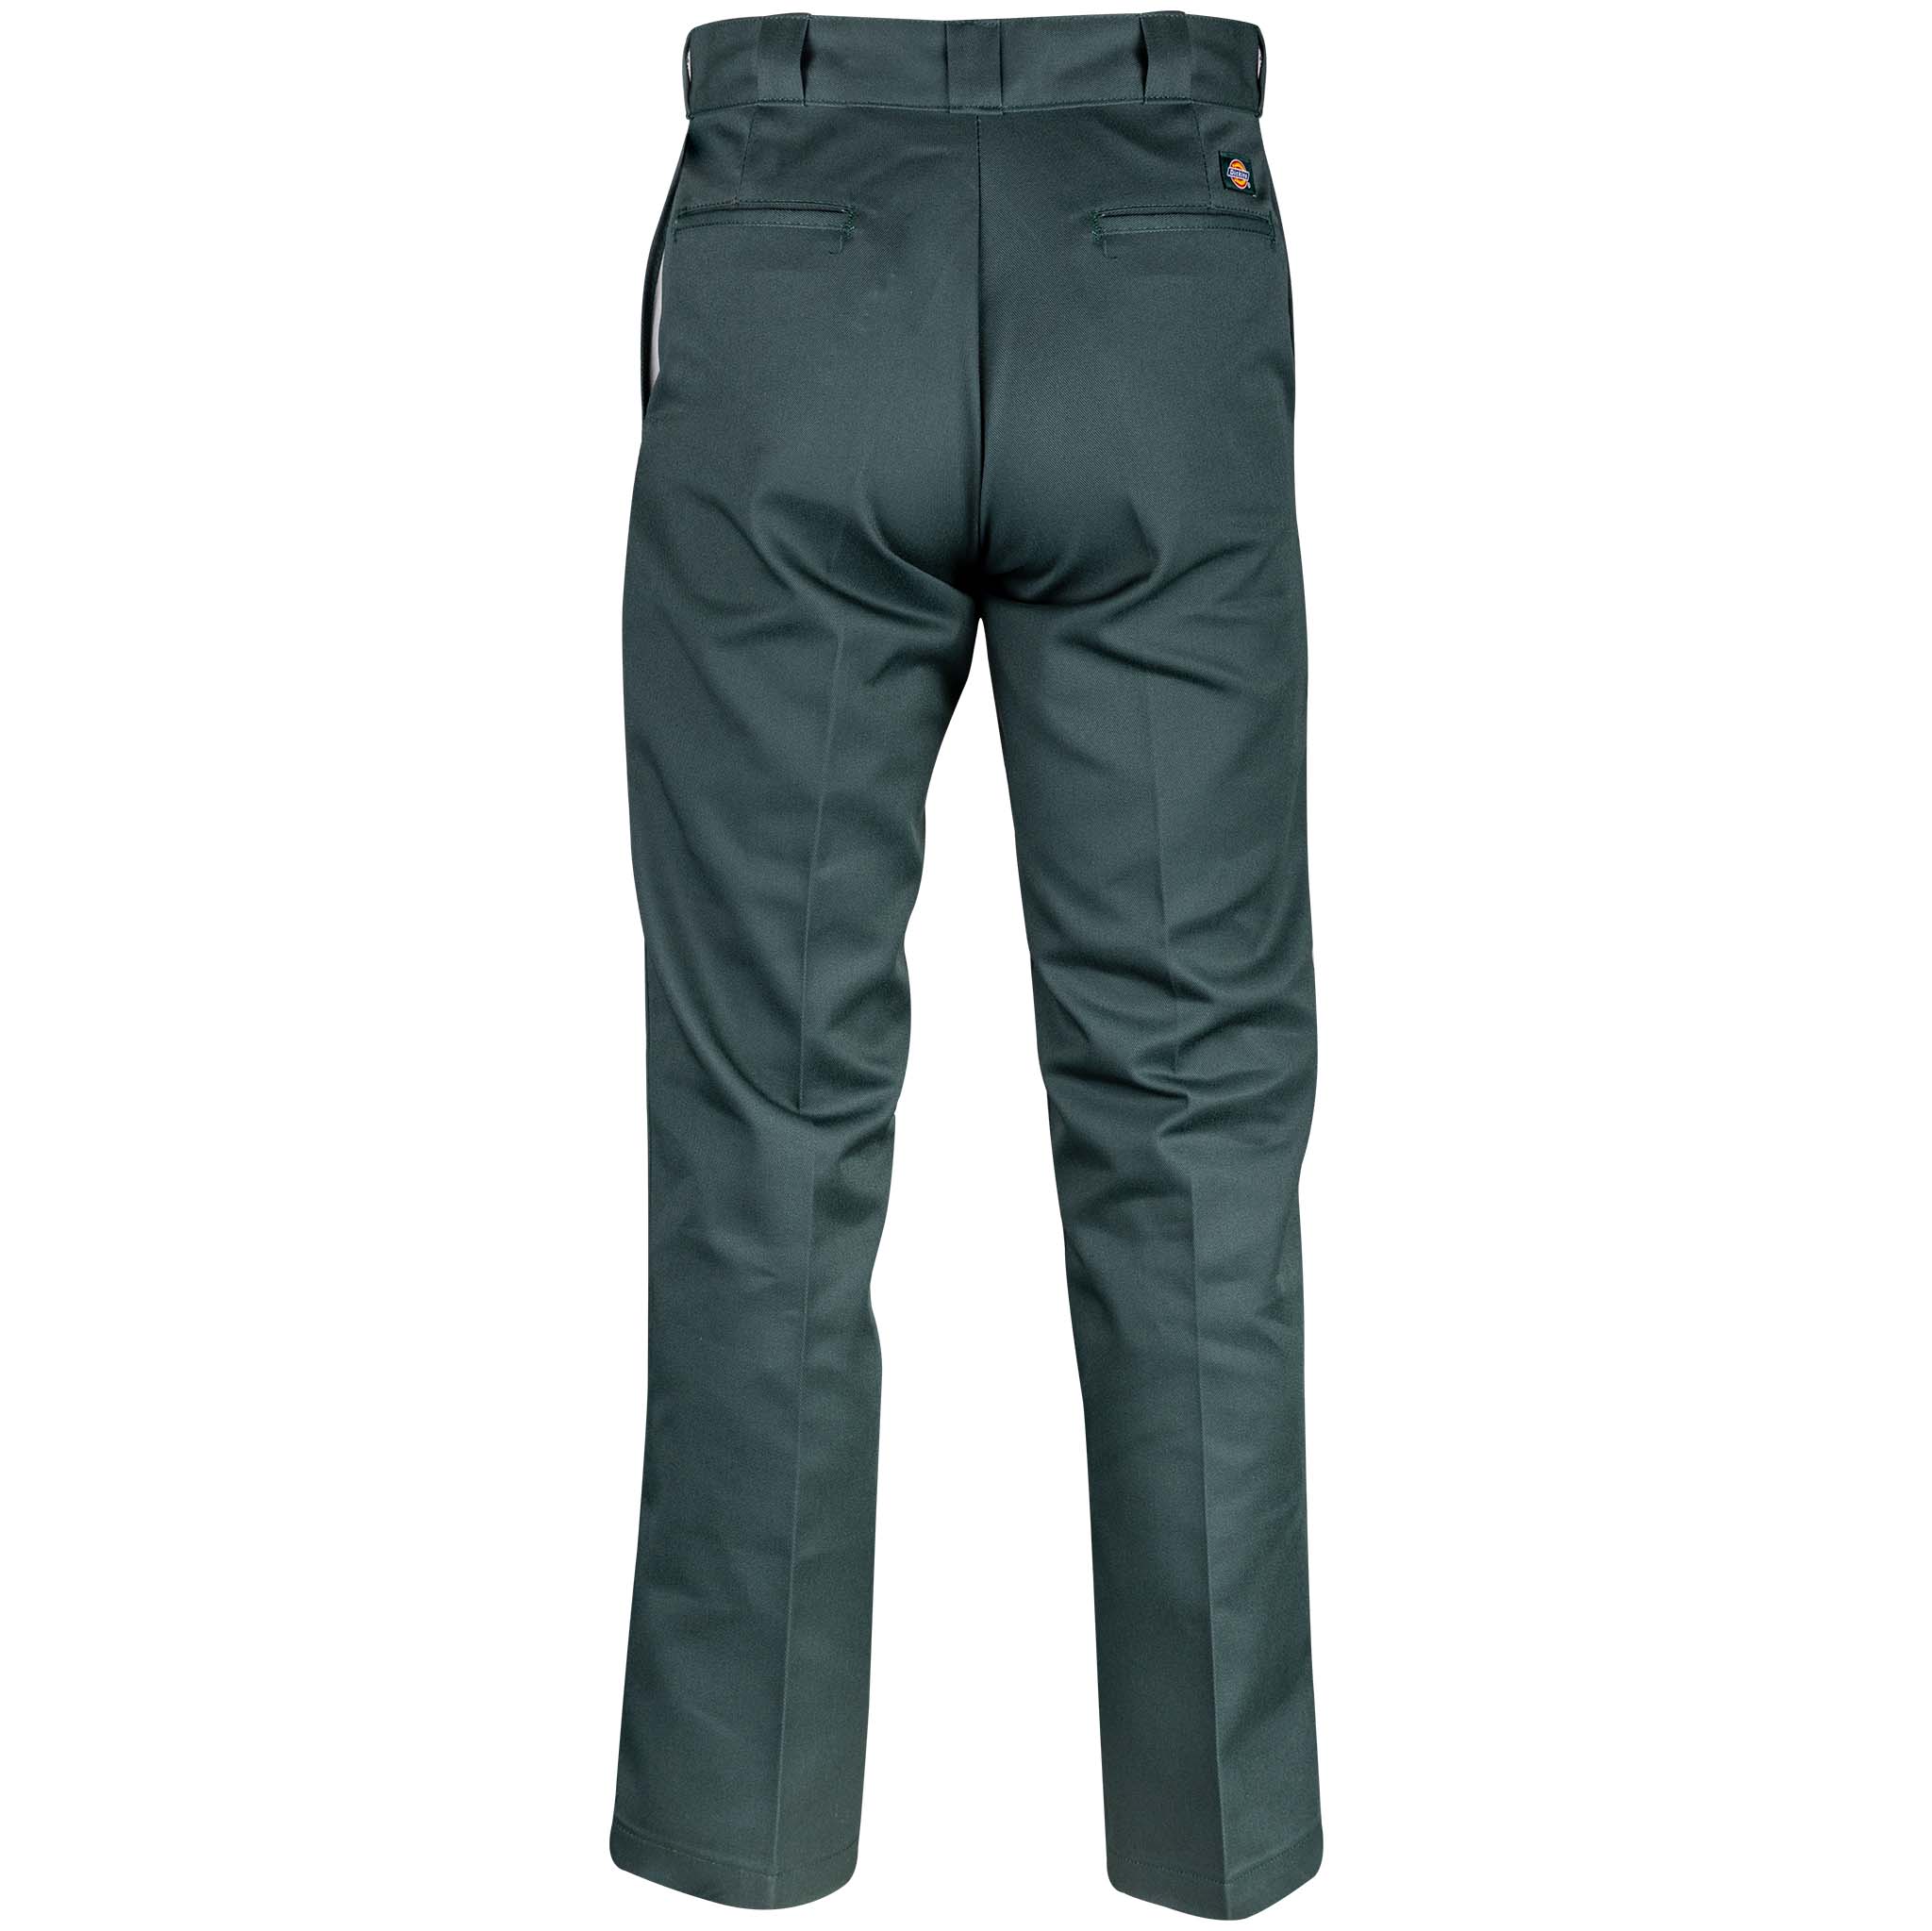 Original 874 Work Pant (Unisex) in Olive green, Trousers